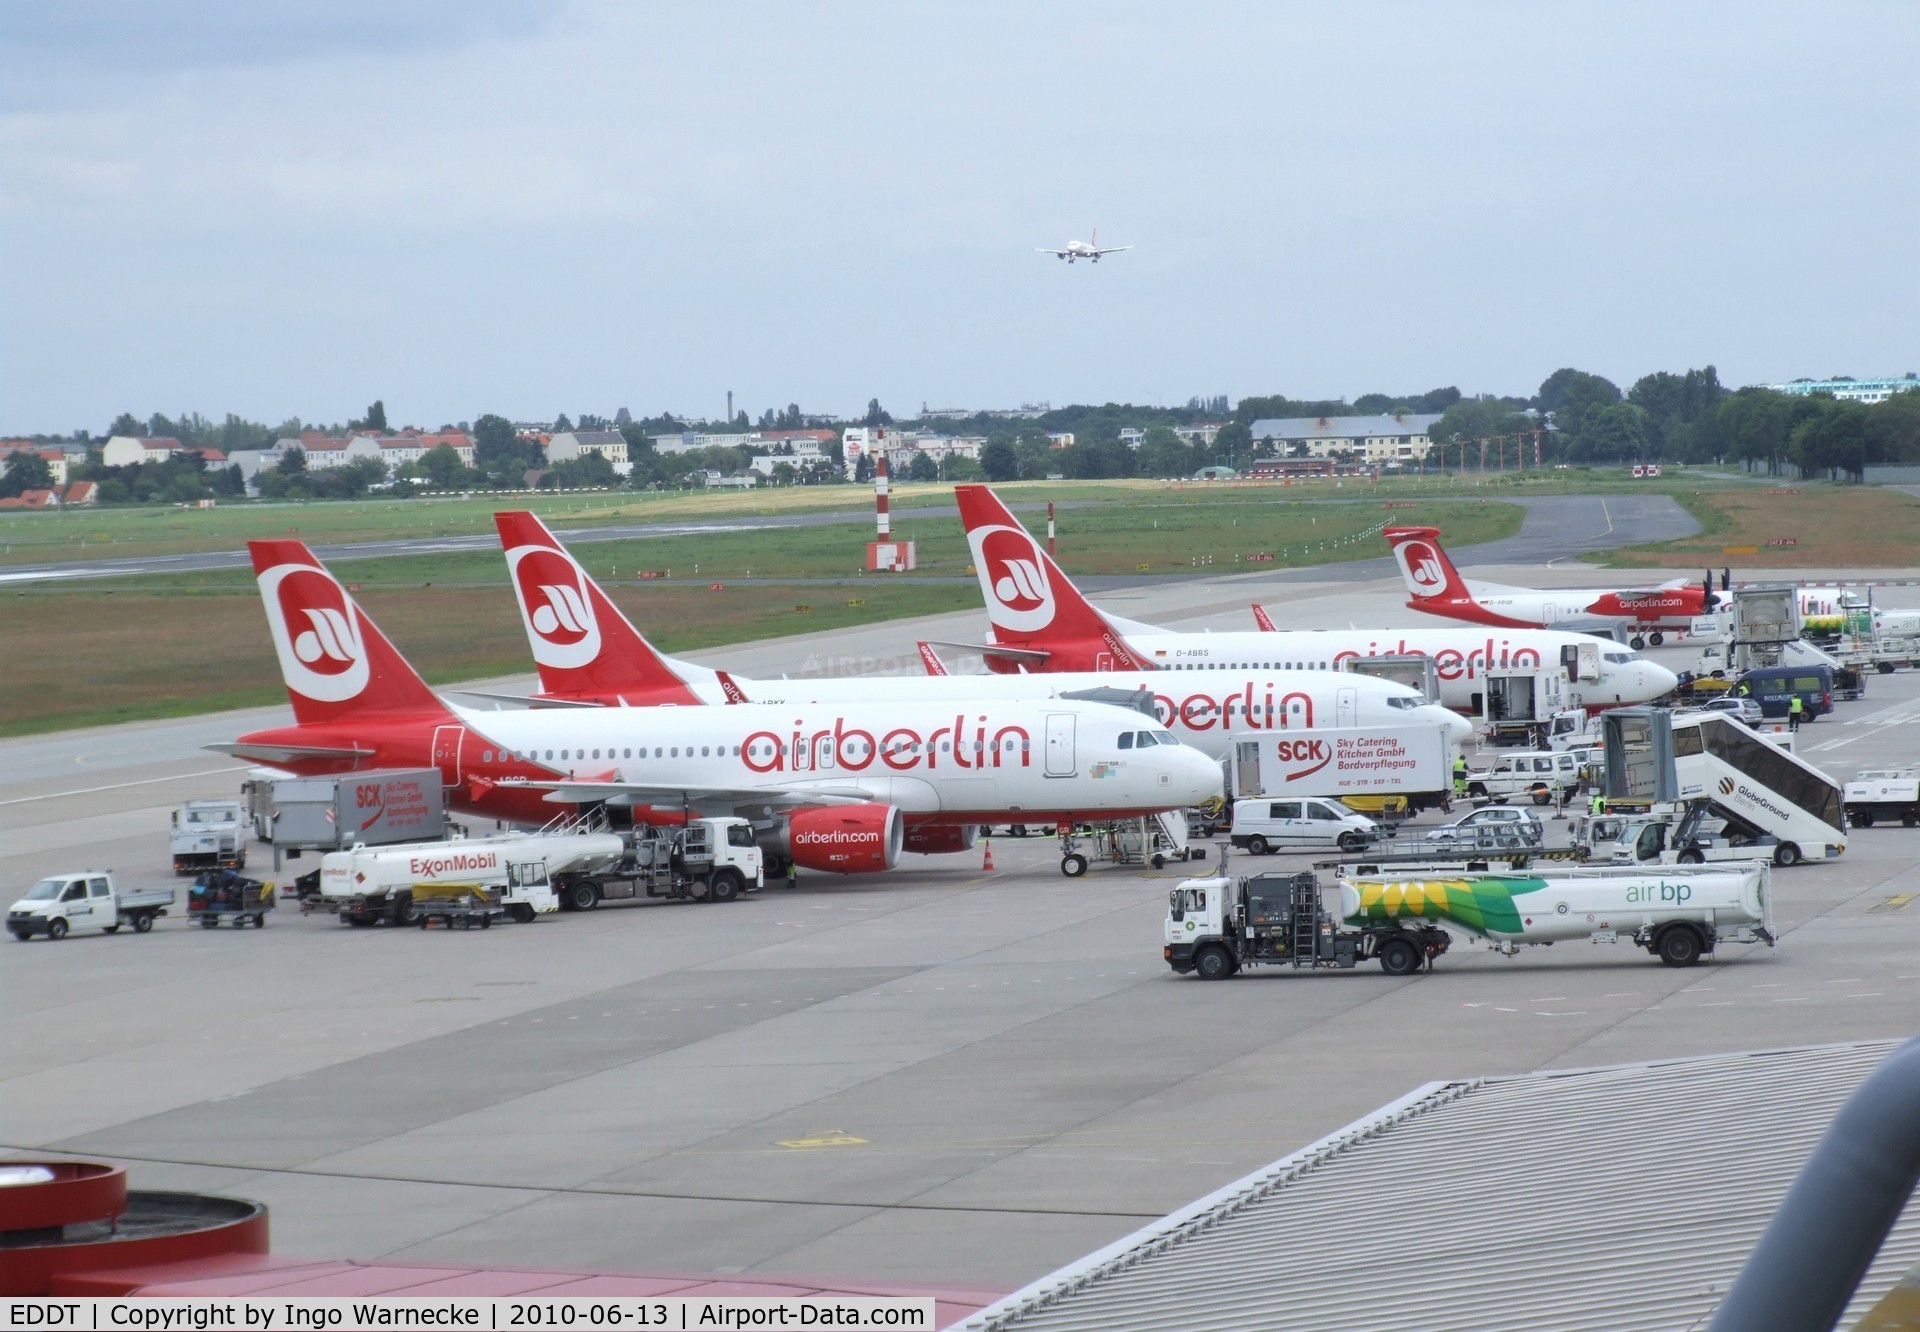 Tegel International Airport (closing in 2011), Berlin Germany (EDDT) - airberlin aircraft at the eastern apron at Berlin Tegel airport